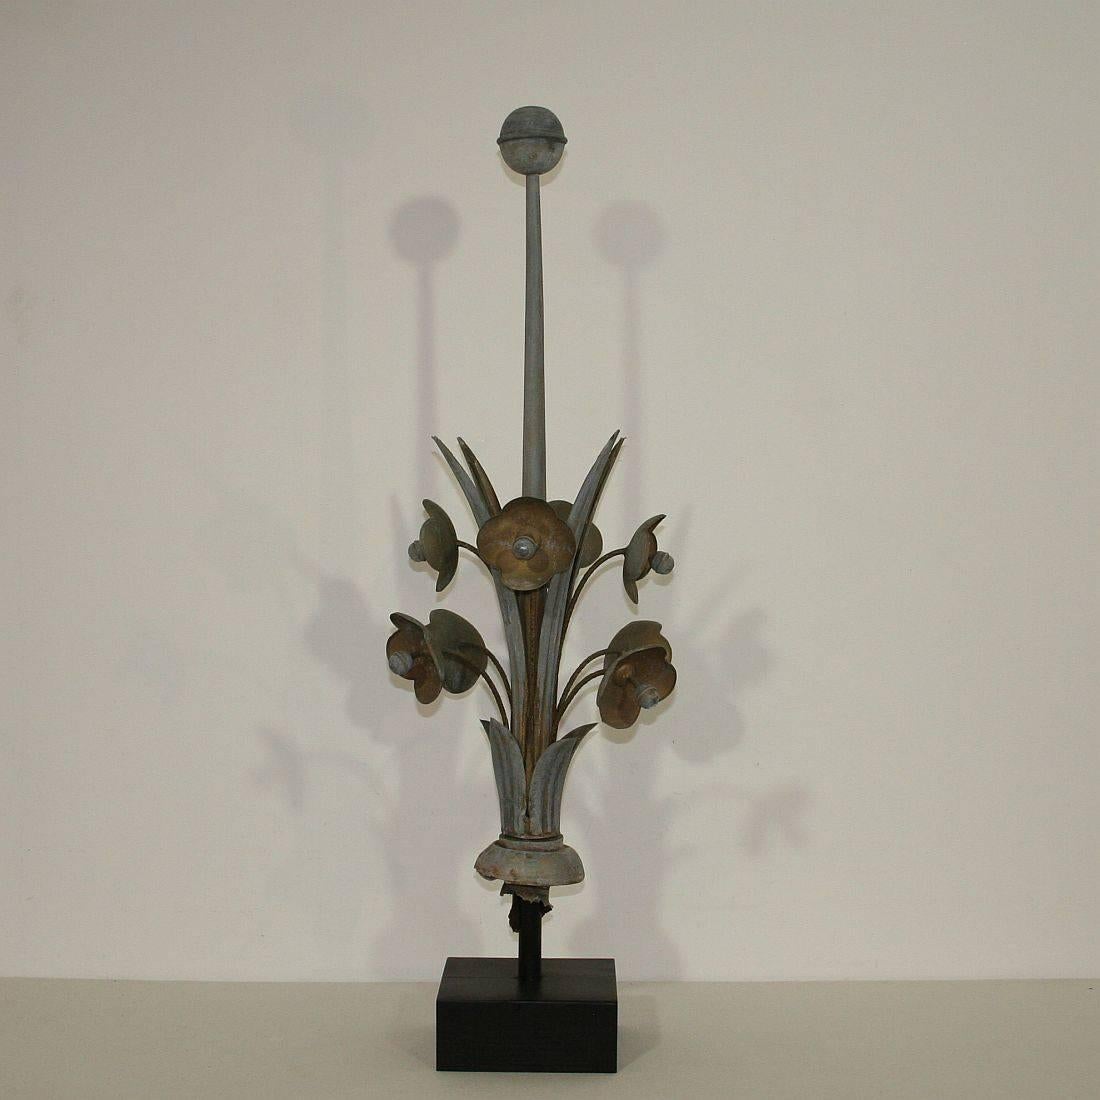 Beautiful and rare zinc roof finial with flowers
France, circa 1880-1900
Weathered
Measurement here below inclusive the base.